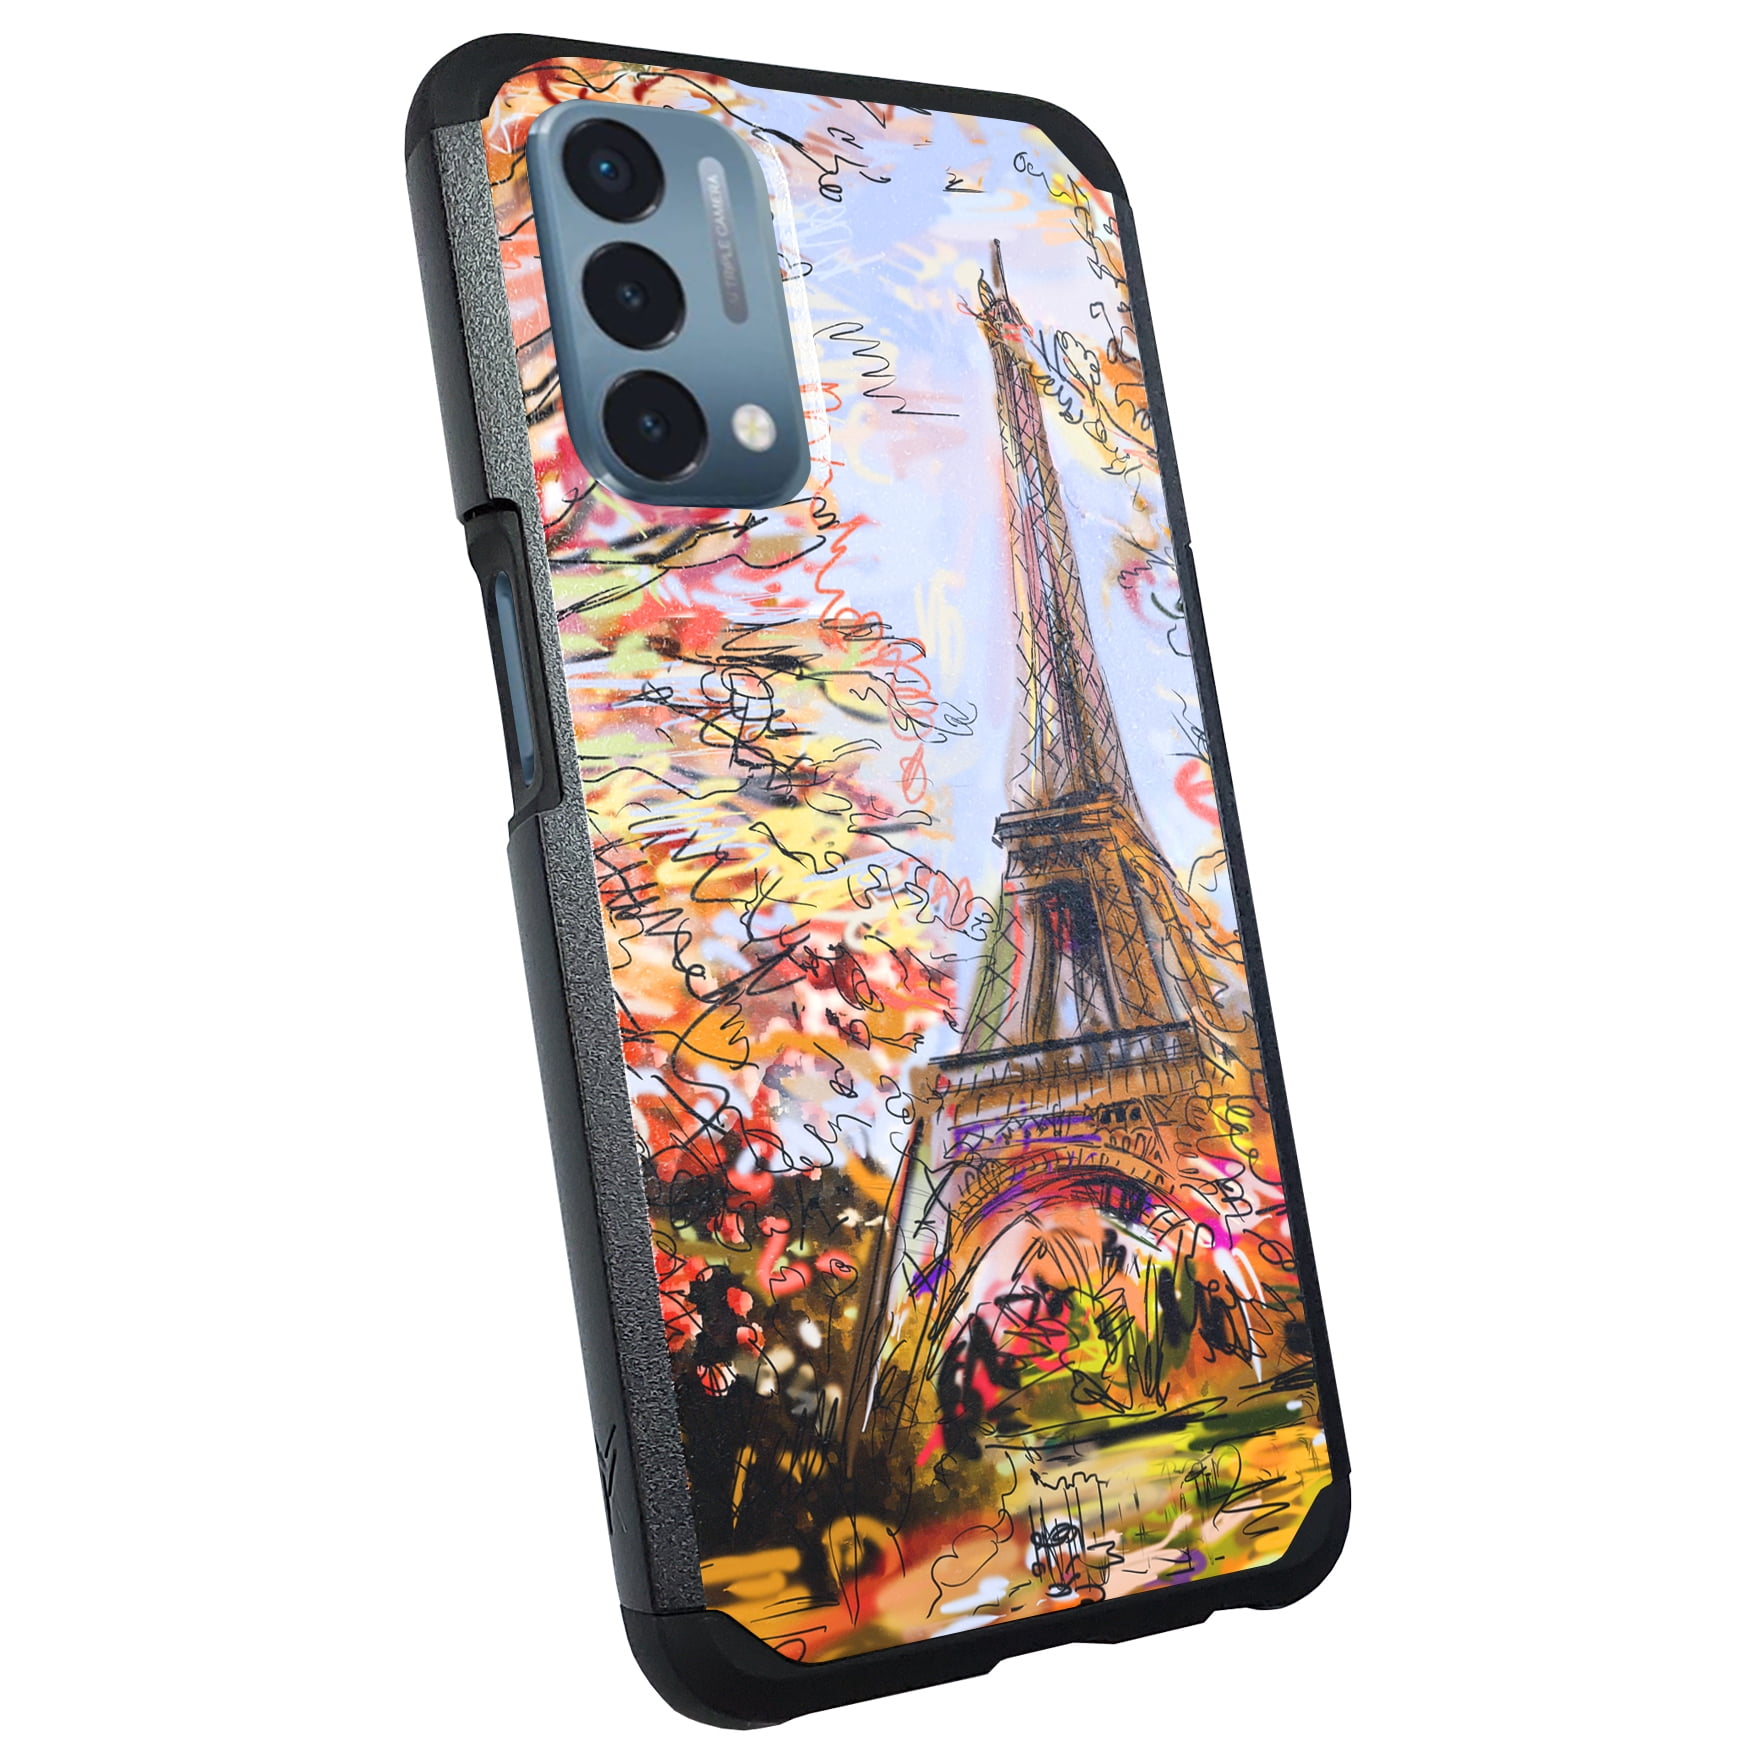 Thin Gel Cover Flexible TalkingCase Slim Case for OnePlus Nord N200 5G Cactus Forest YEL Print Anti-Scratch USA Soft Light Weight